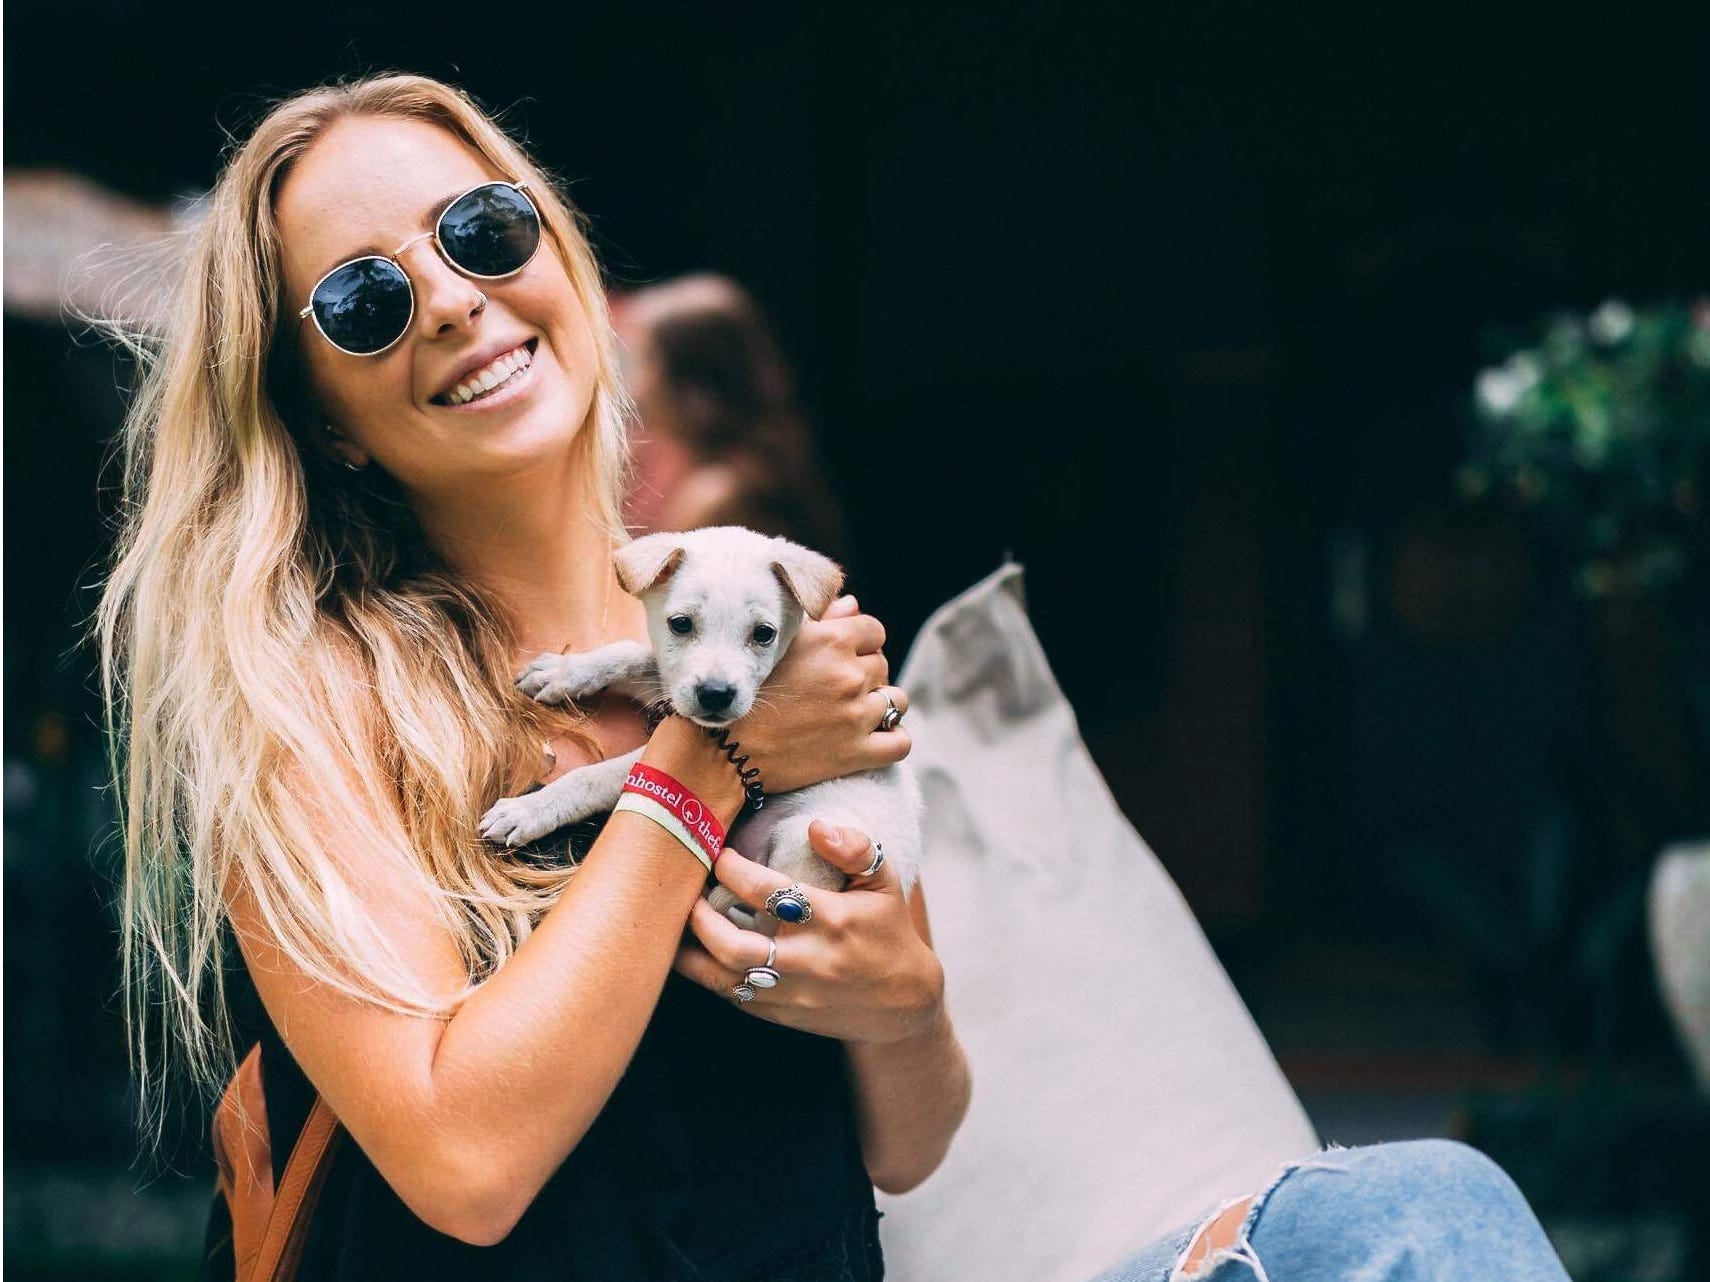 This Hotel In Bali Provides Guests With “Puppy Therapy” And Free Yoga